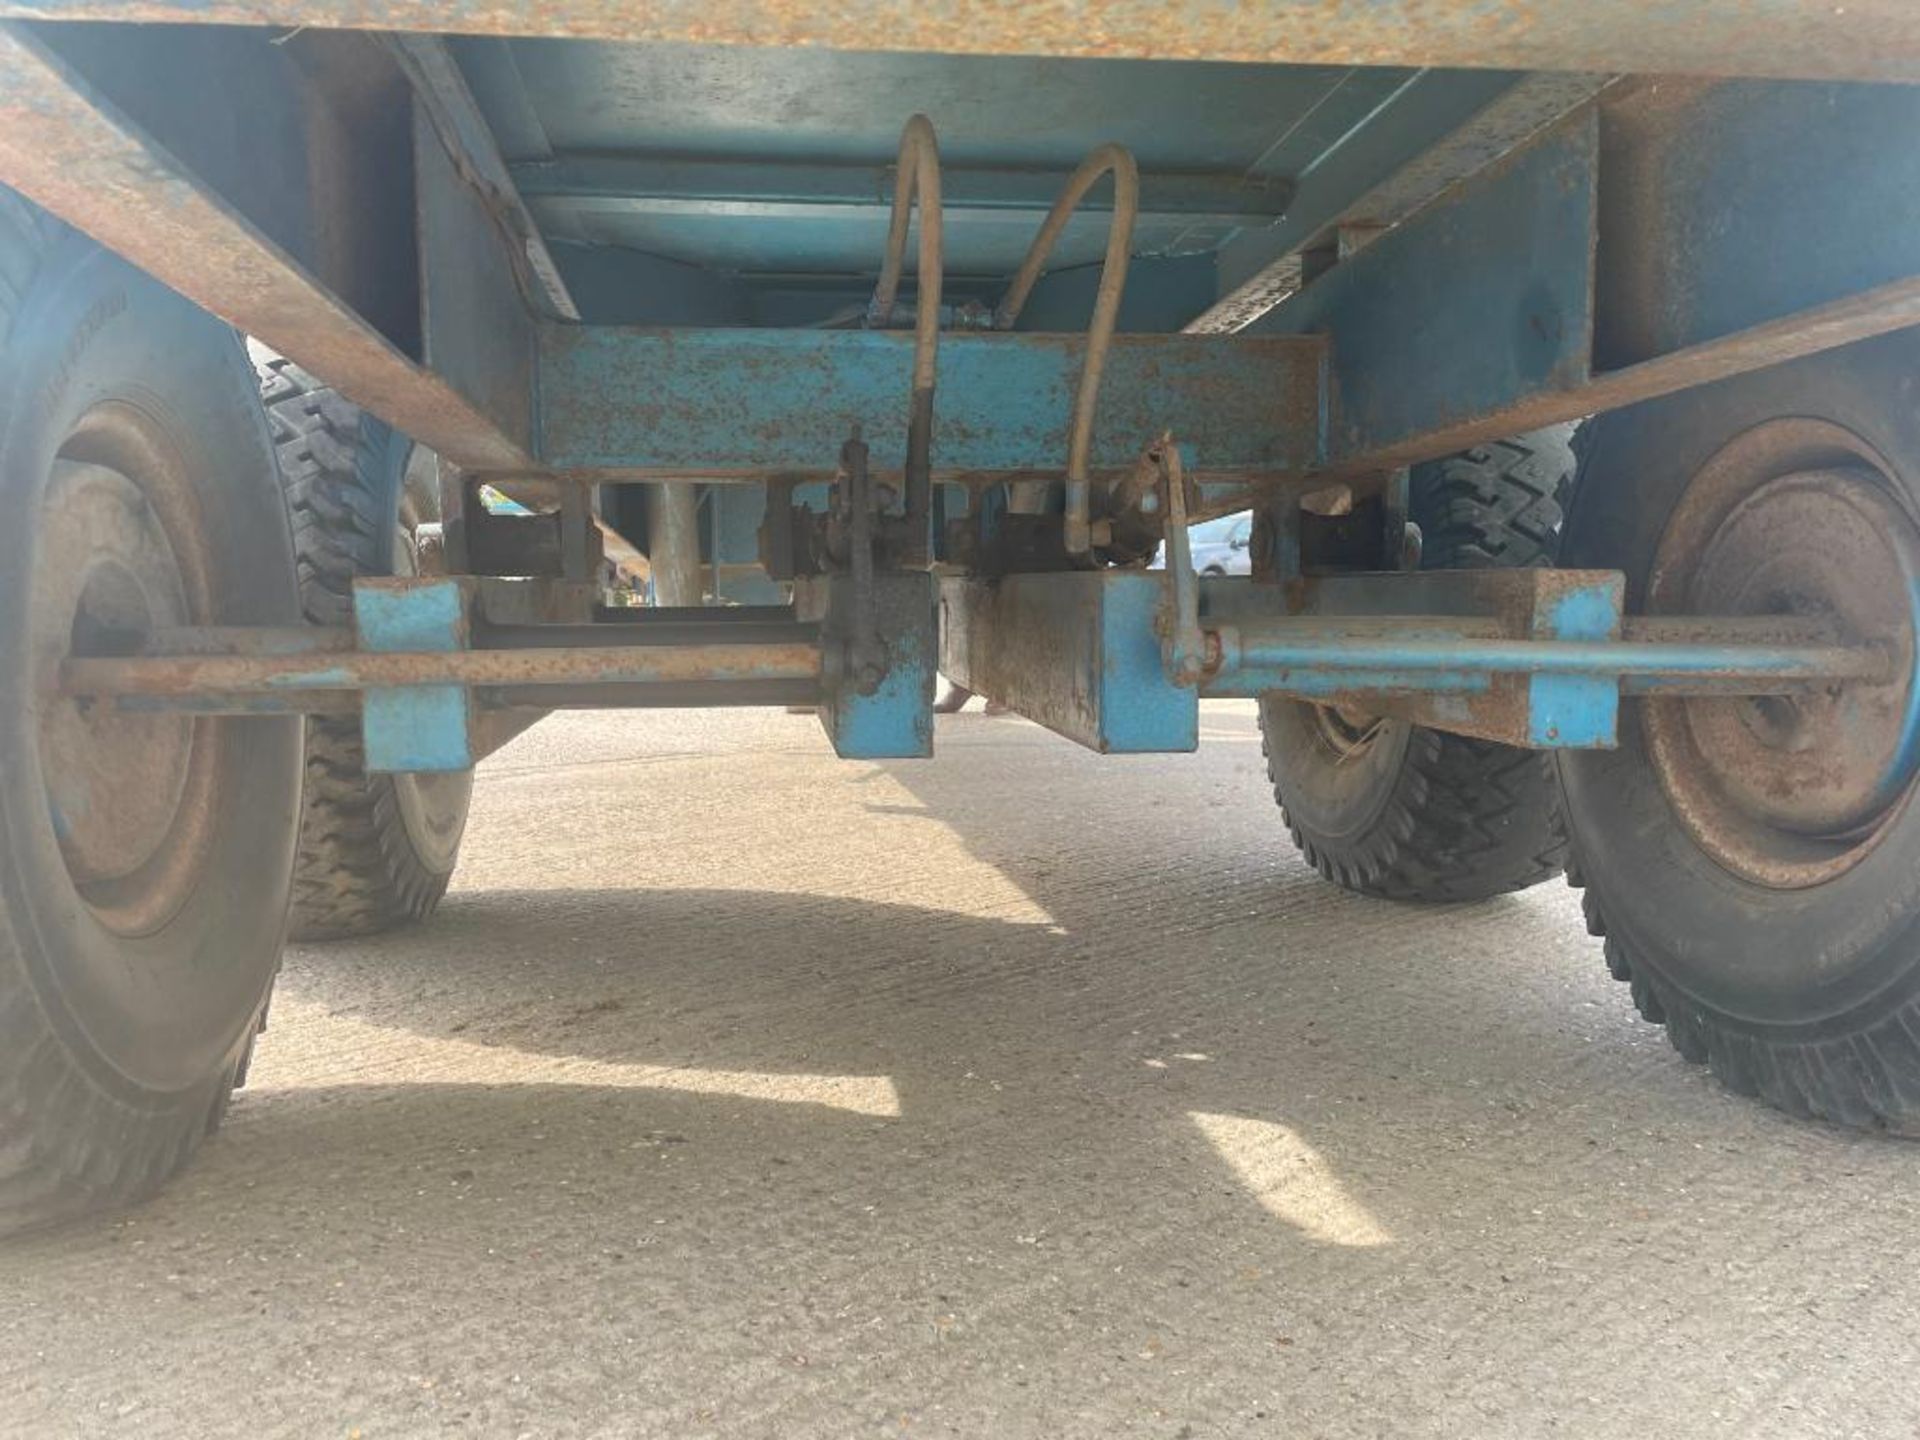 1986 Richard Western 10t twin axle grain trailer with manual tailgate, grain chute and rollover shee - Image 9 of 16